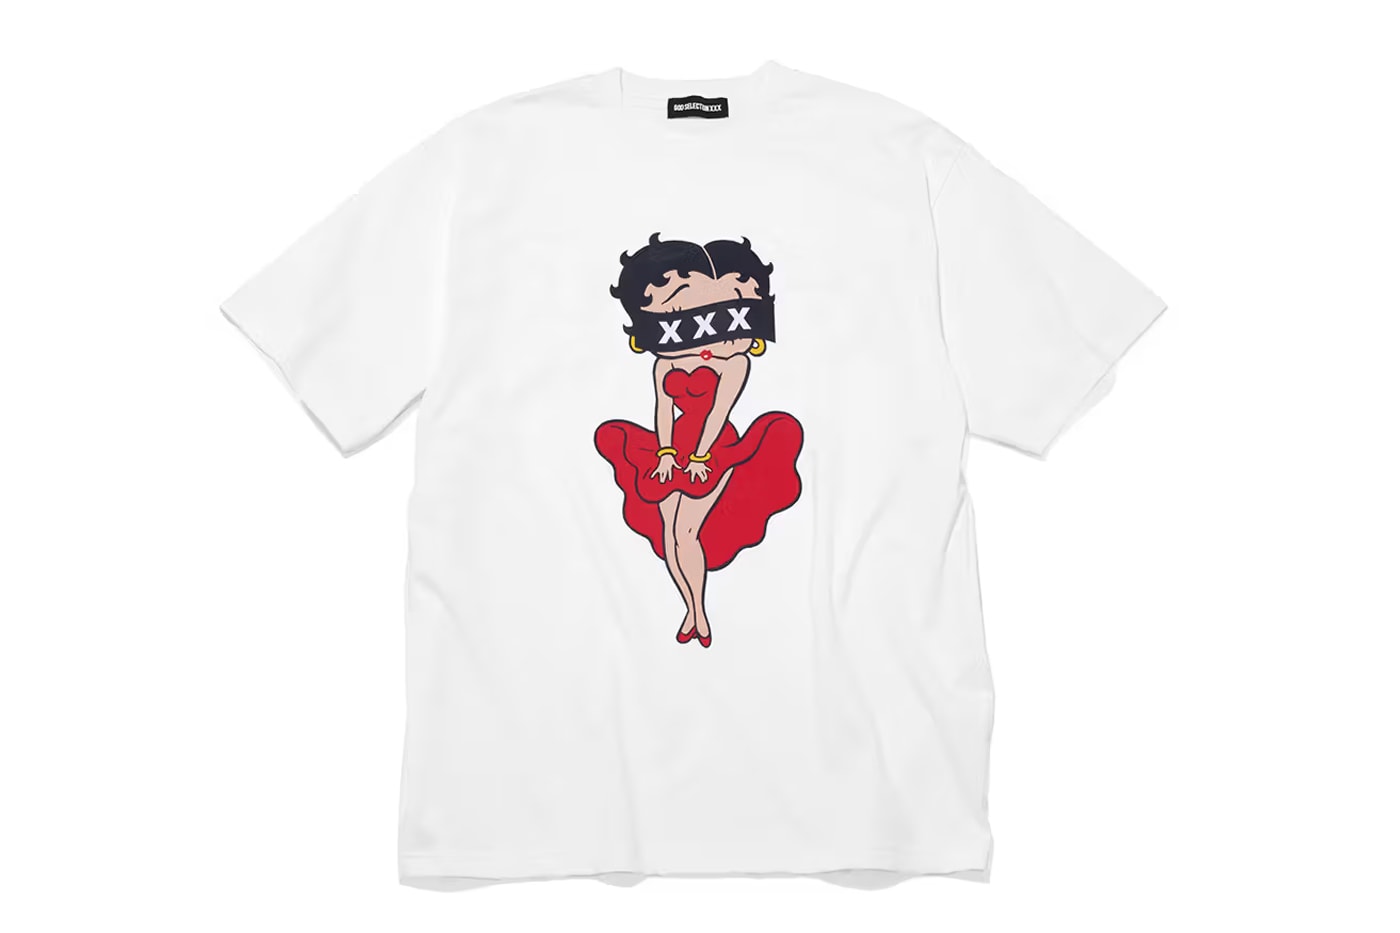 god selection xxx betty boop collaboration crewneck sweatshirt hoodie t shirt sex official release date info phots price store list buying guide 